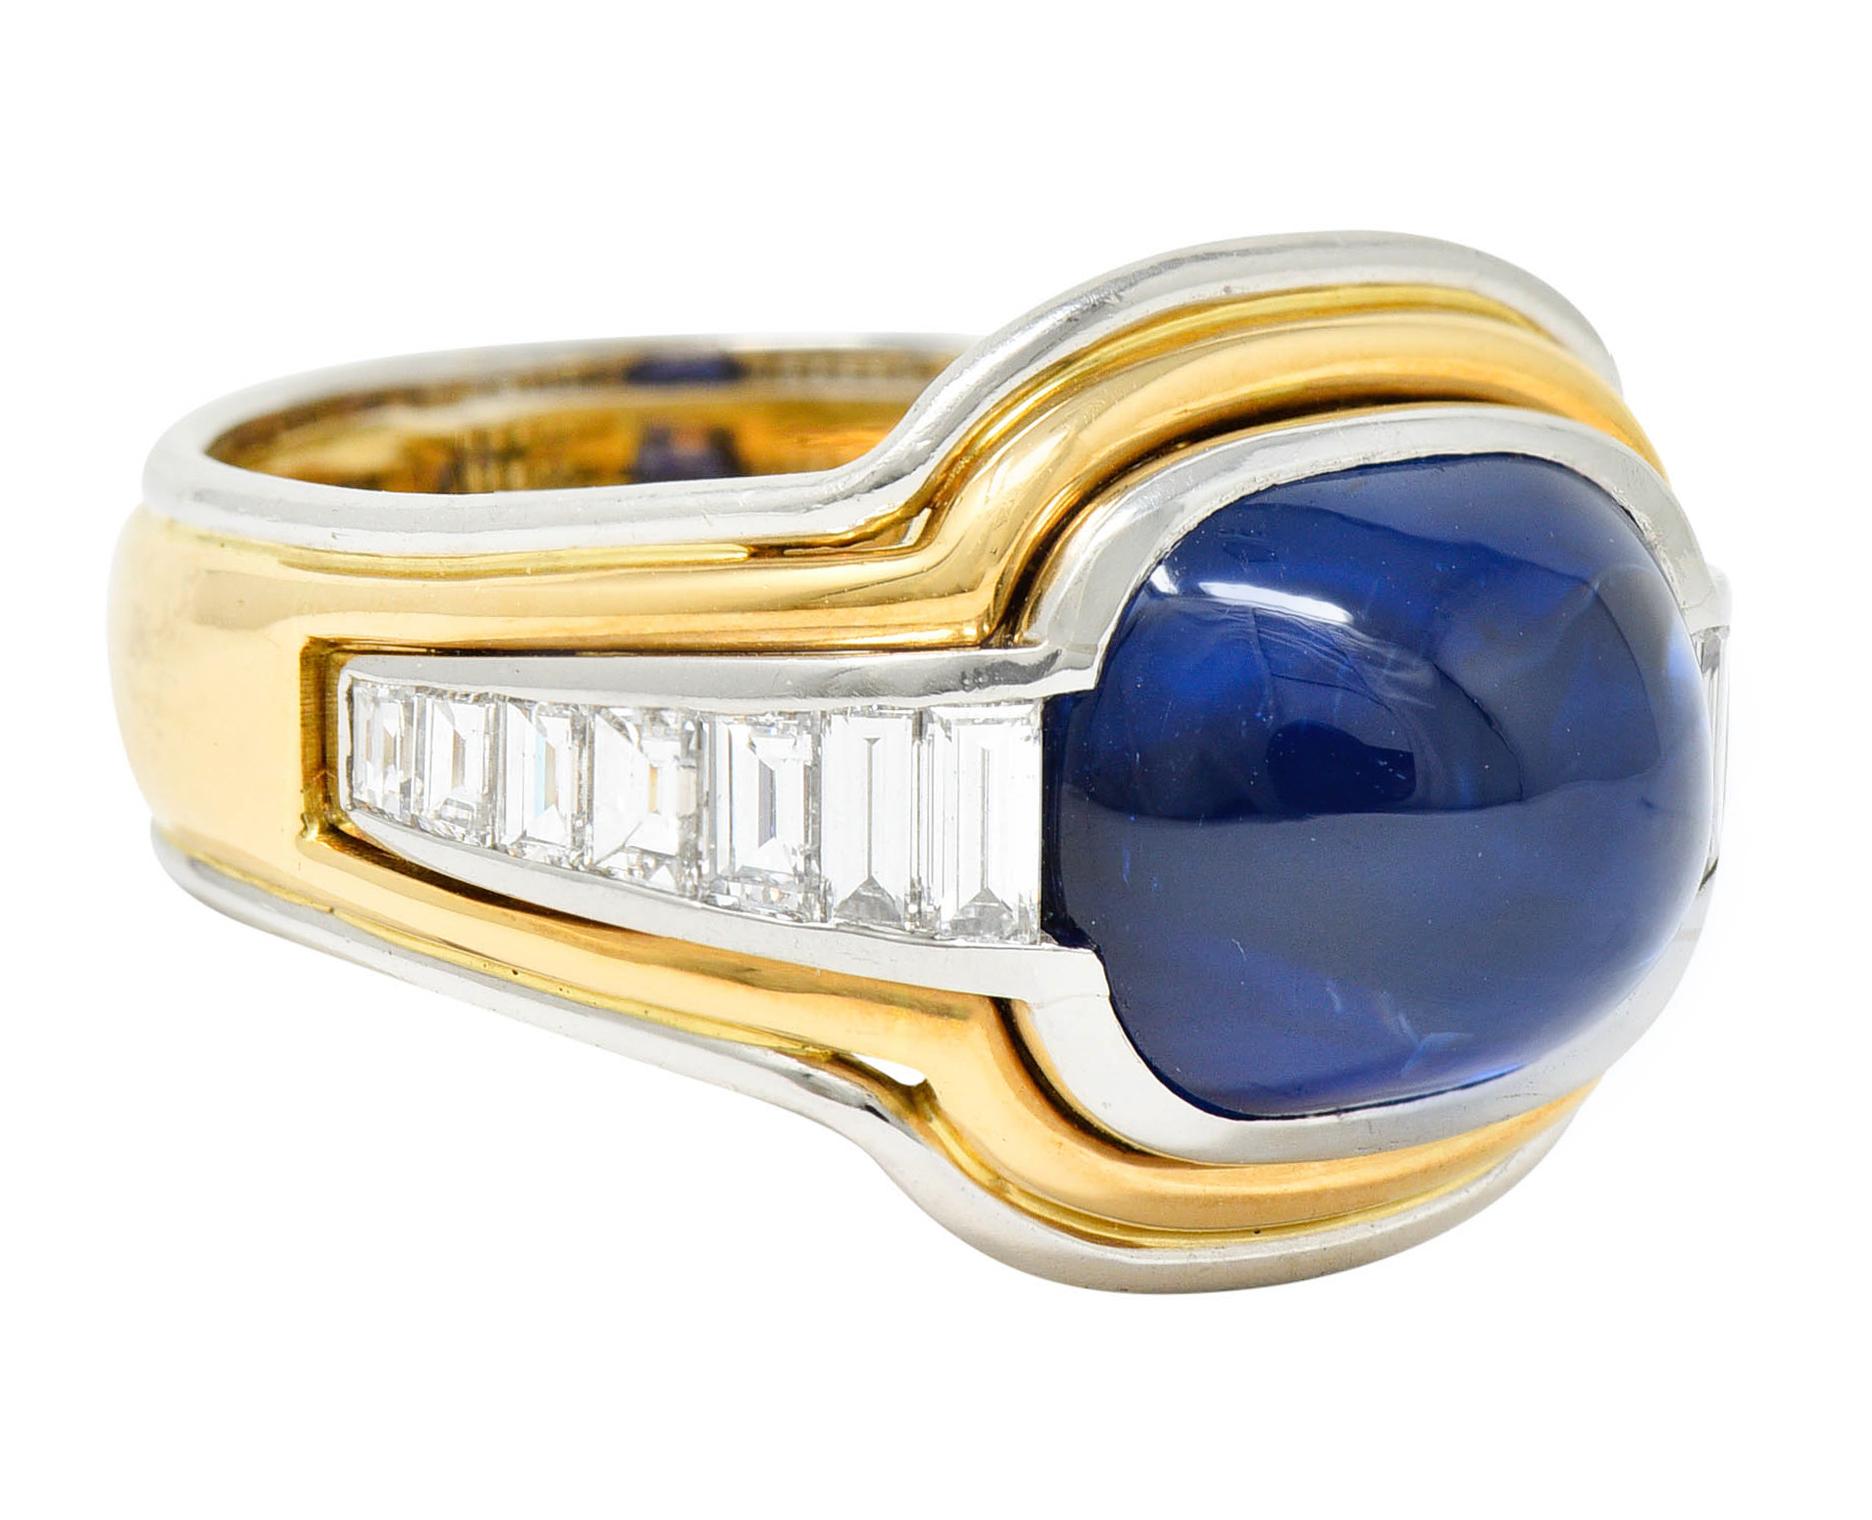 Centering a cushion cabochon sapphire weighing approximately 9.00 carats

Transparent with vibrant royal blue color

Bezel set in white gold and flanked by channel set baguette cut diamonds - graduating in size

Weighing in total approximately 1.00